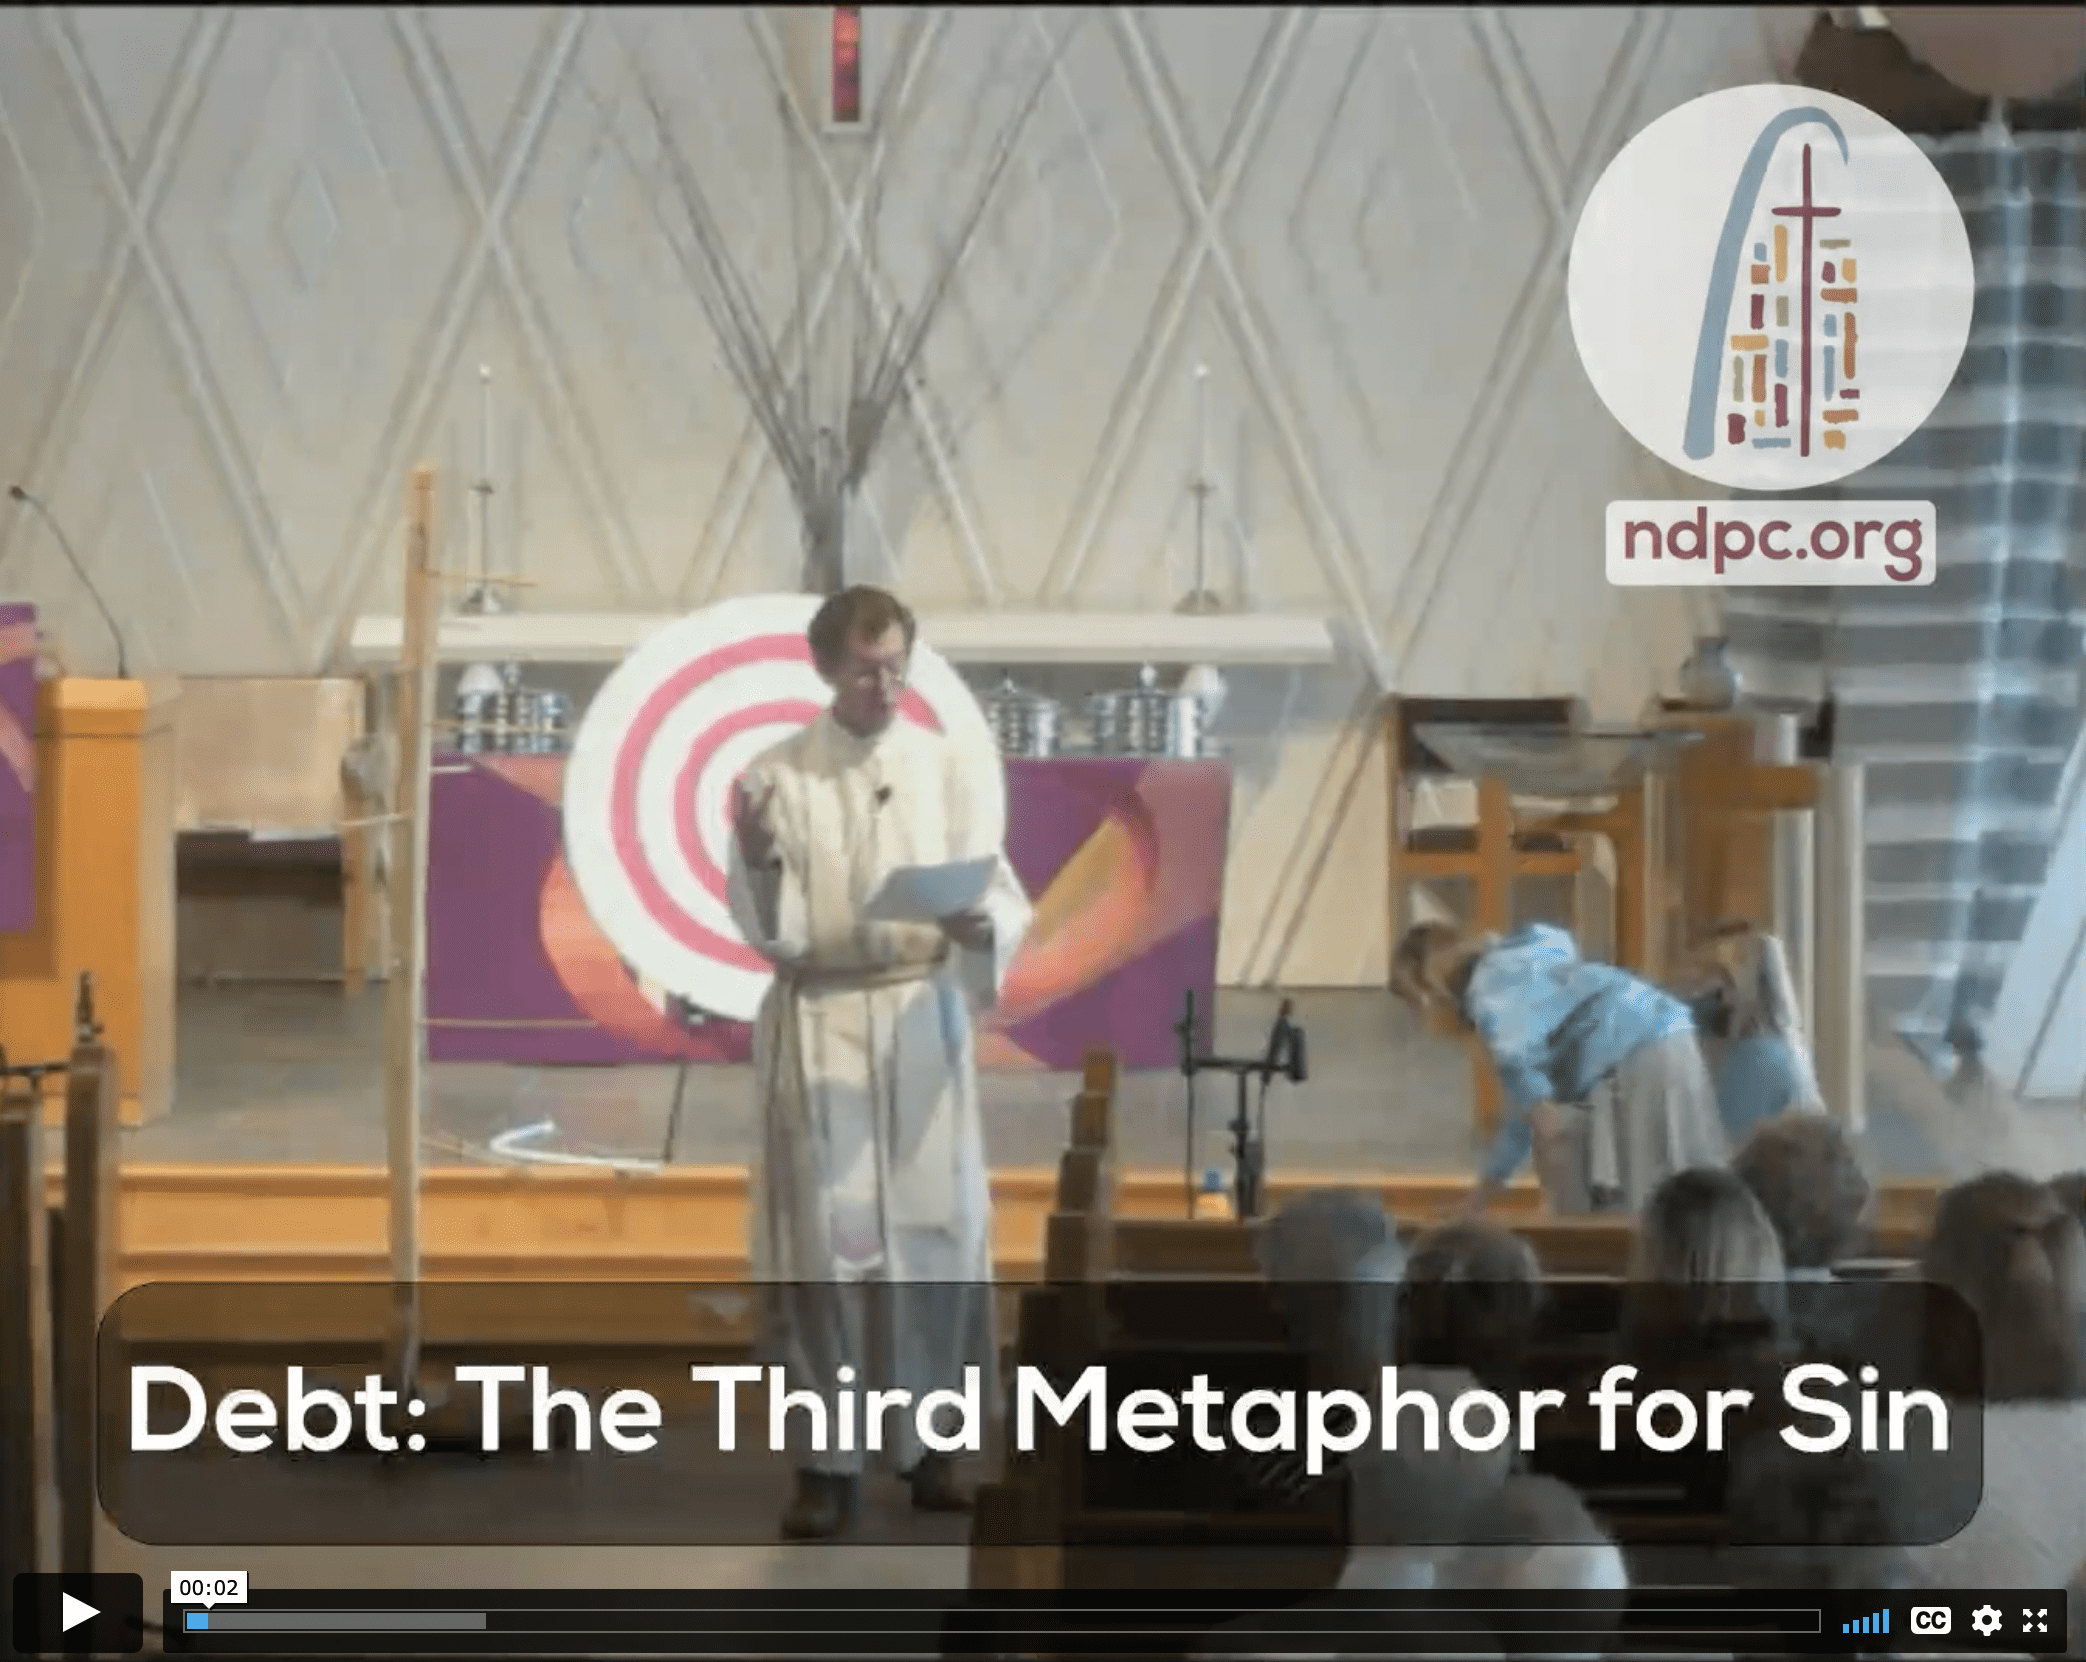 Video Link to 3rd classical metaphor for Sin: Debt